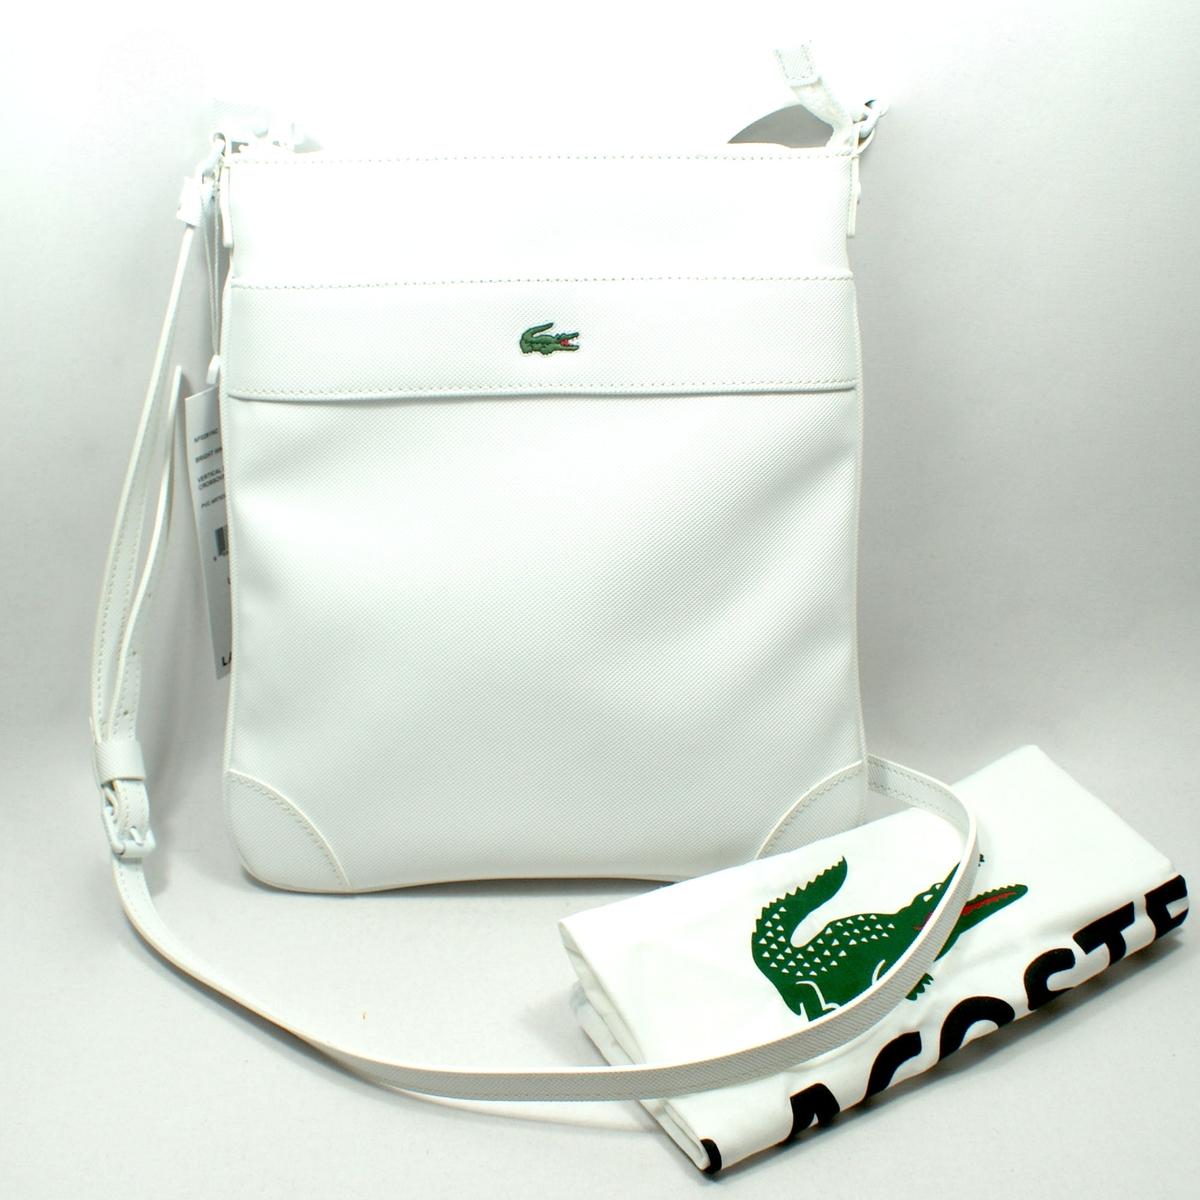 Lacoste Bright White Vertical Flat Crossover Bag/ Crossbody Bag #NF0281NC | Lacoste NF0281NC